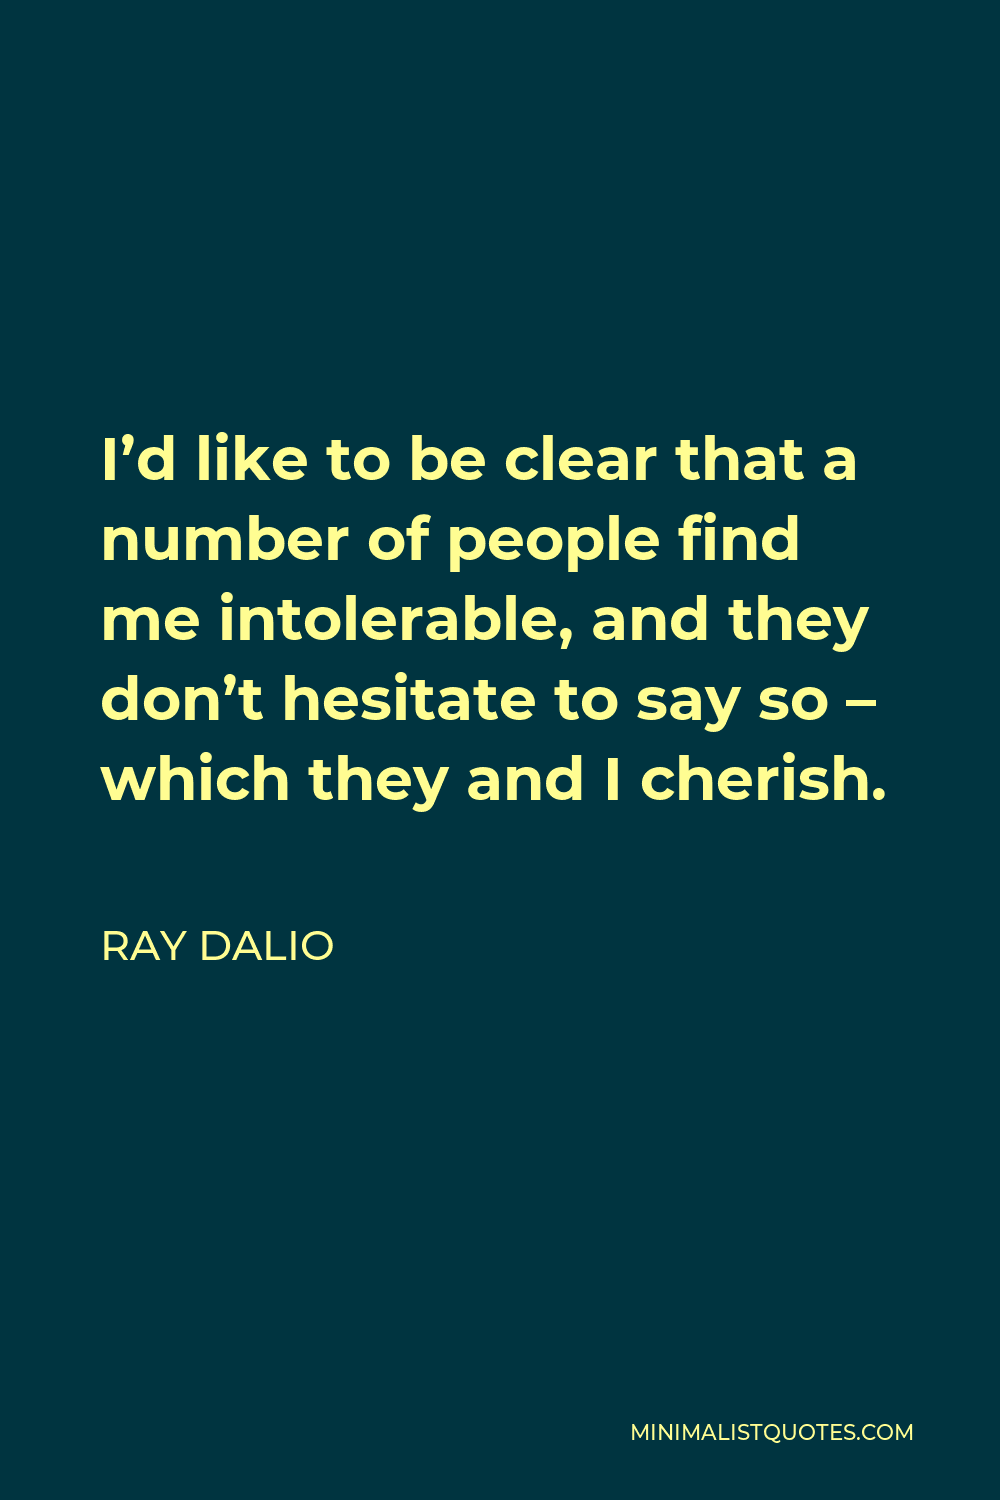 Ray Dalio Quote - I’d like to be clear that a number of people find me intolerable, and they don’t hesitate to say so – which they and I cherish.